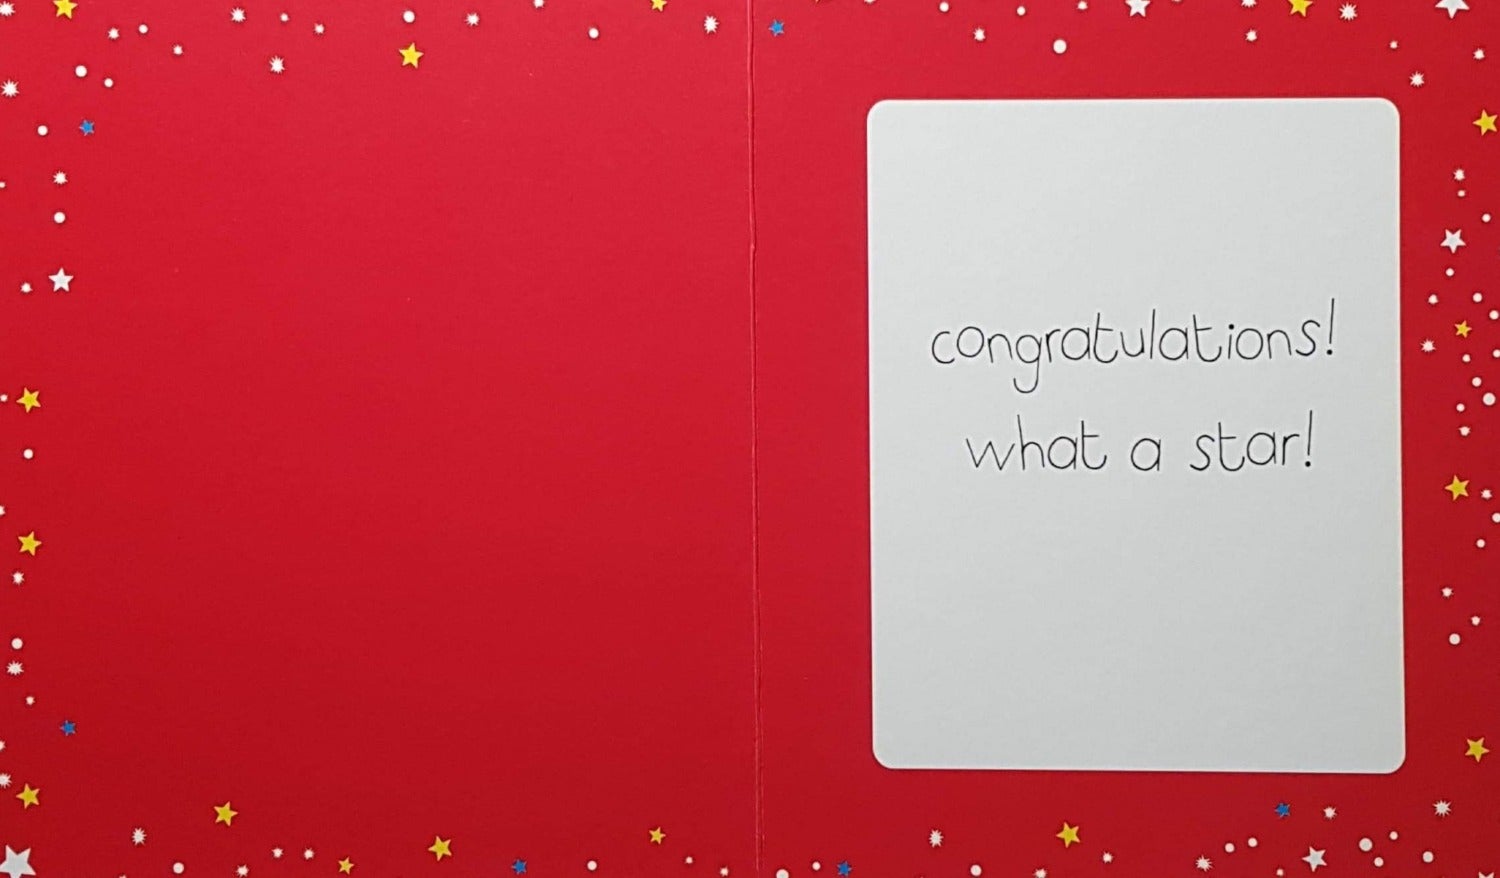 Congratulations Card - Passed Your Exams / 'Wow You're Really' & Standing On The Podium